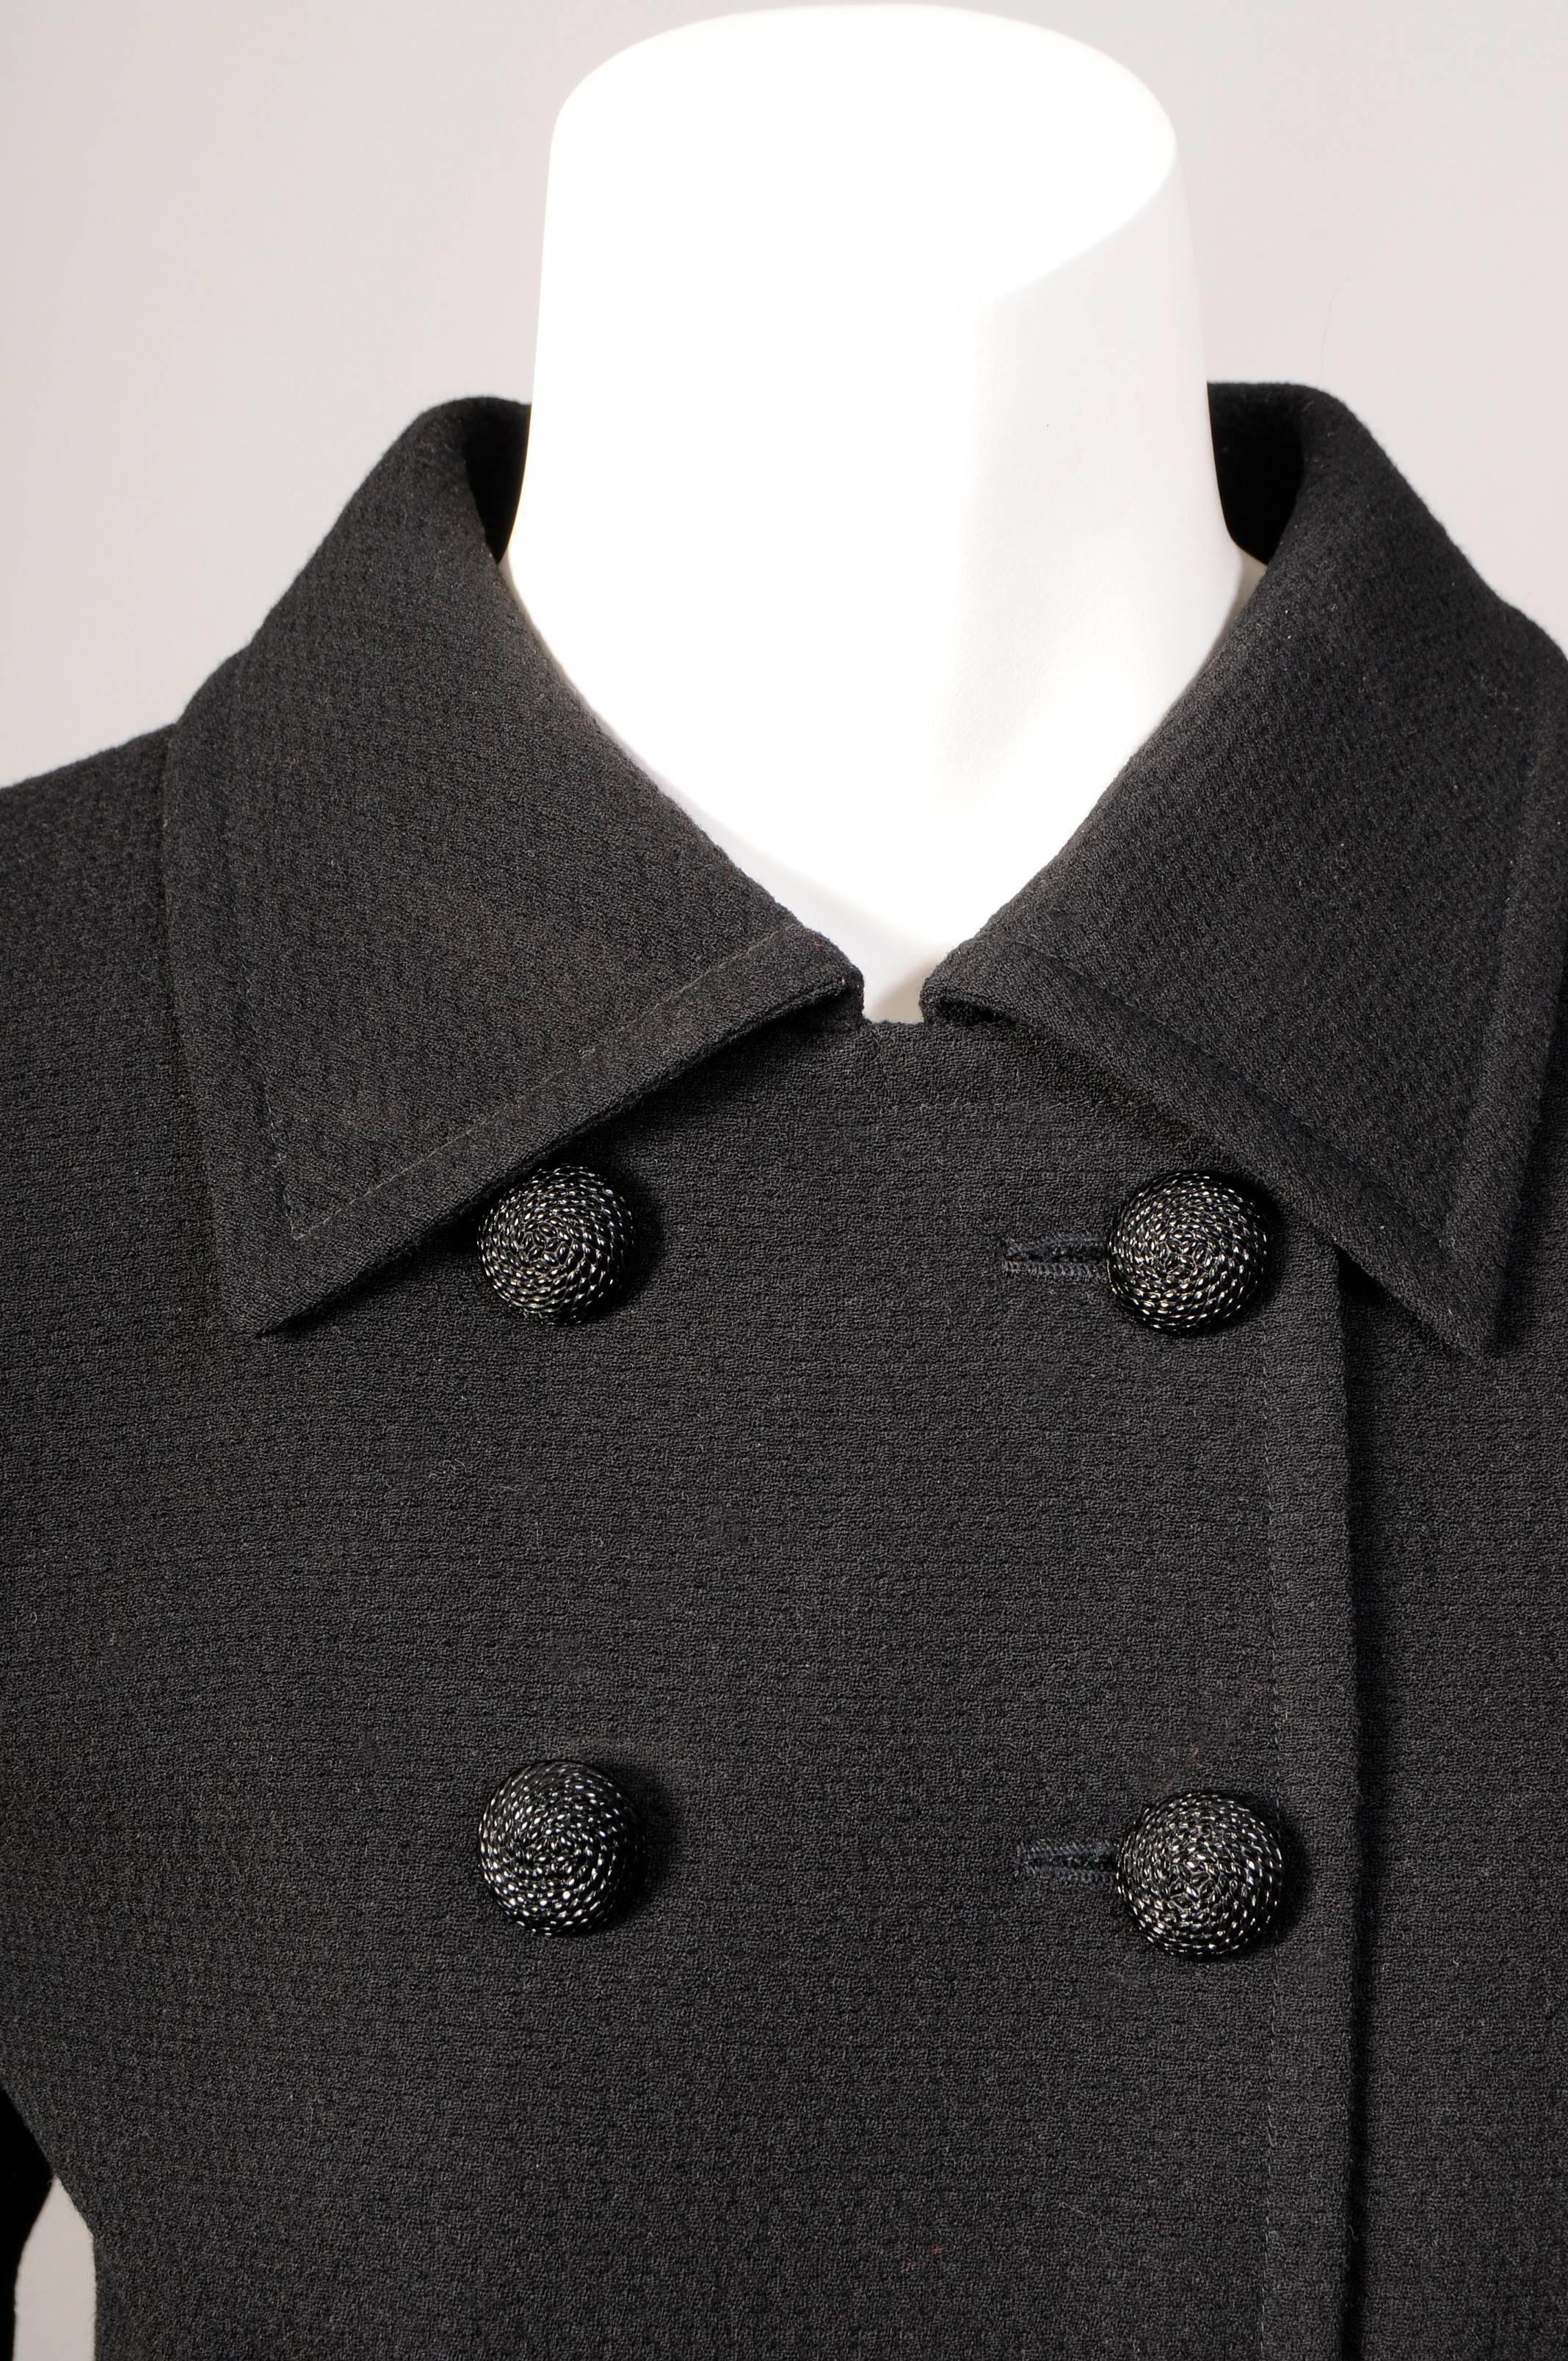 Women's Yves Saint Laurent Haute Couture Double Breasted Black Wool Suit, late 1970s